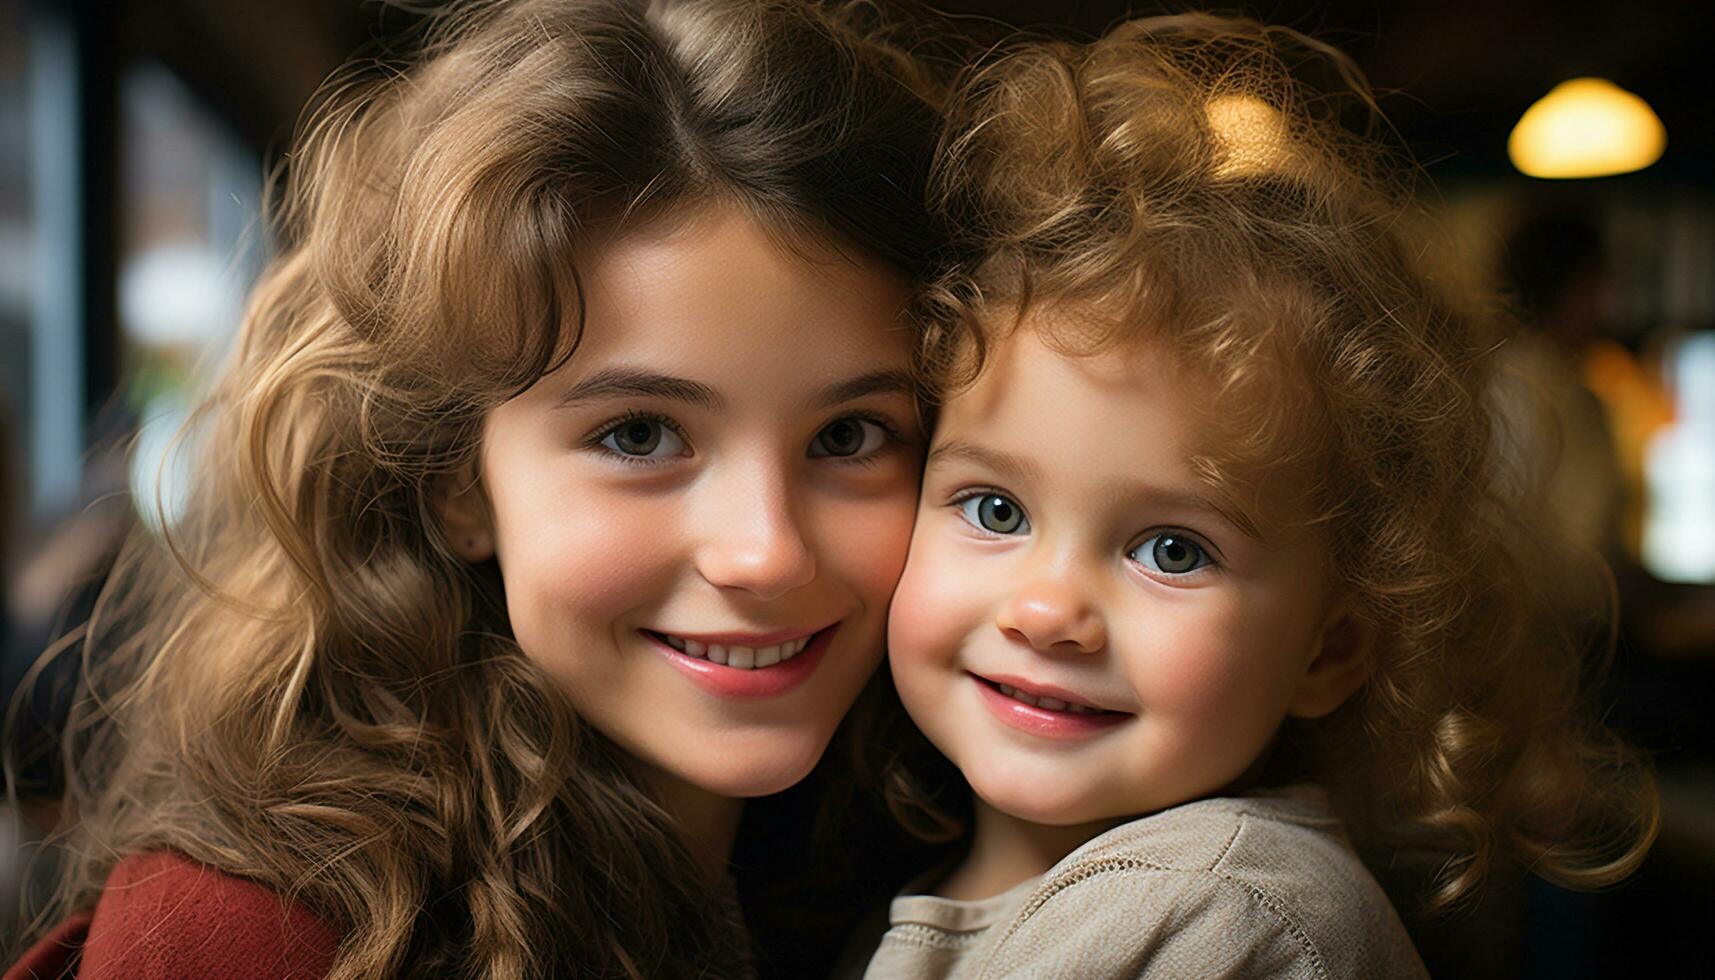 Smiling child, cute happiness, cheerful portrait, family childhood love generated by AI photo